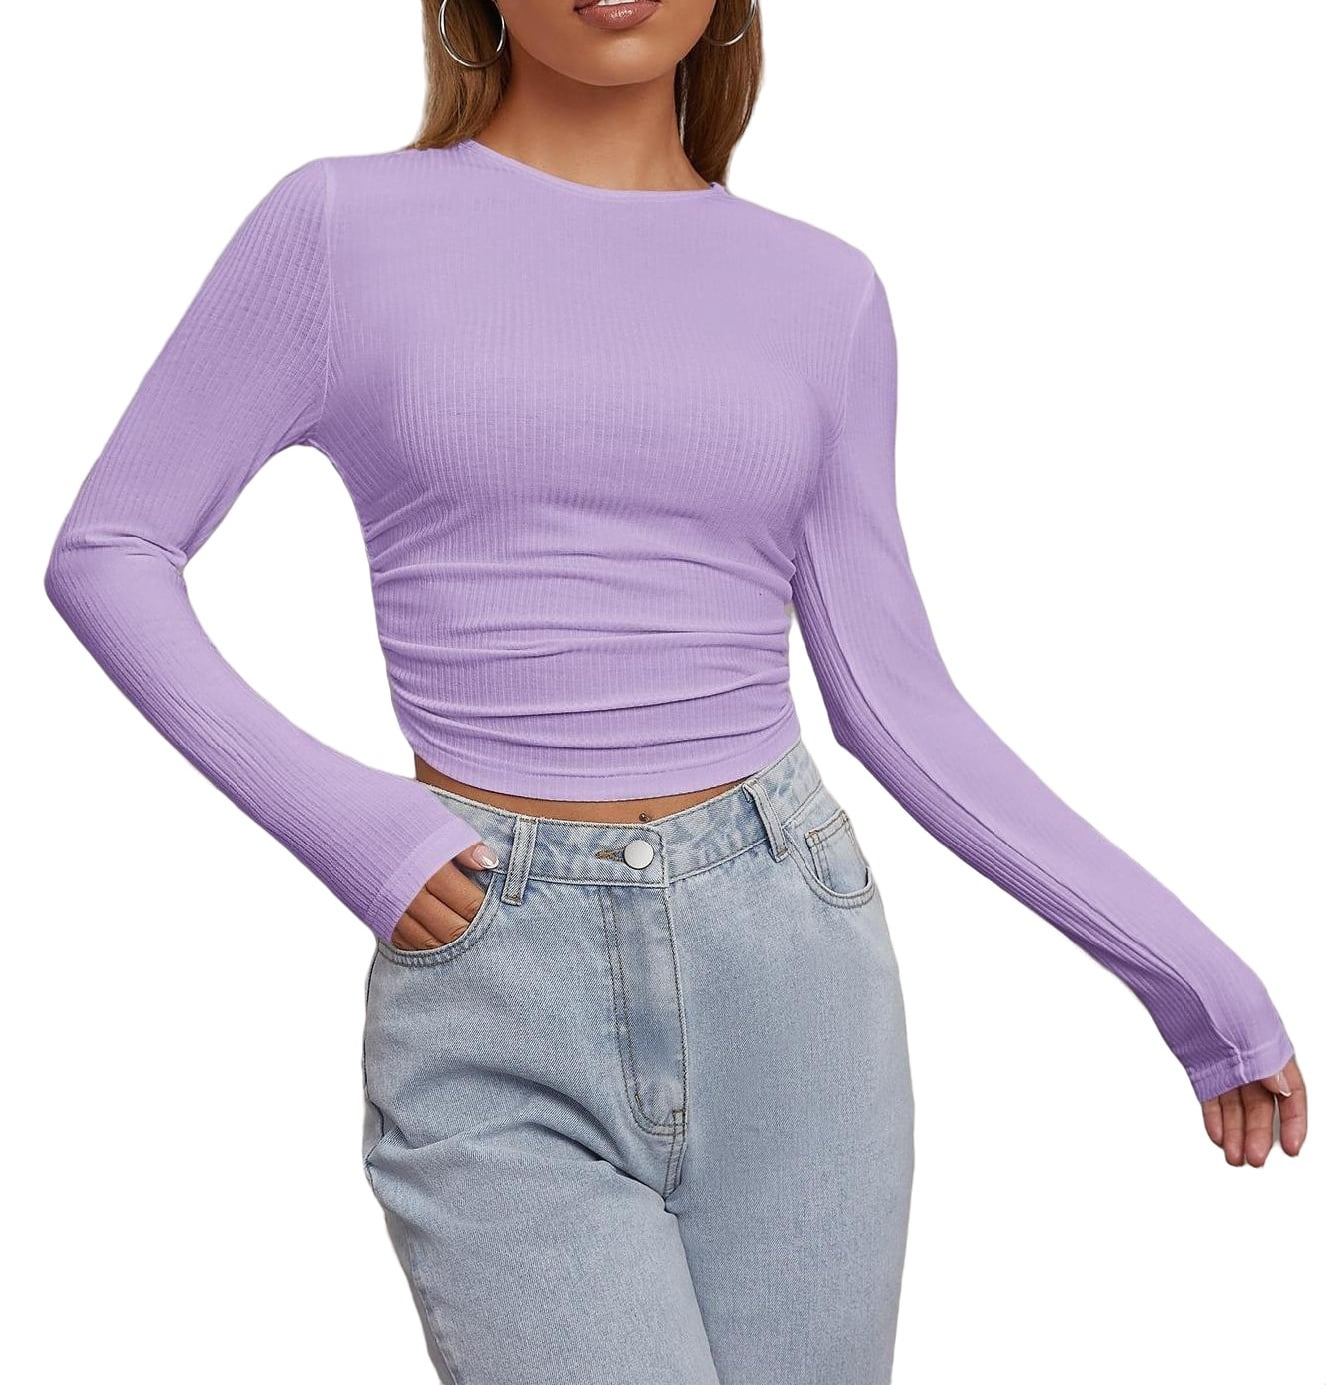 Casual Round Neck Long Sleeve Lilac Purple Womens T-Shirts (Women\'s)